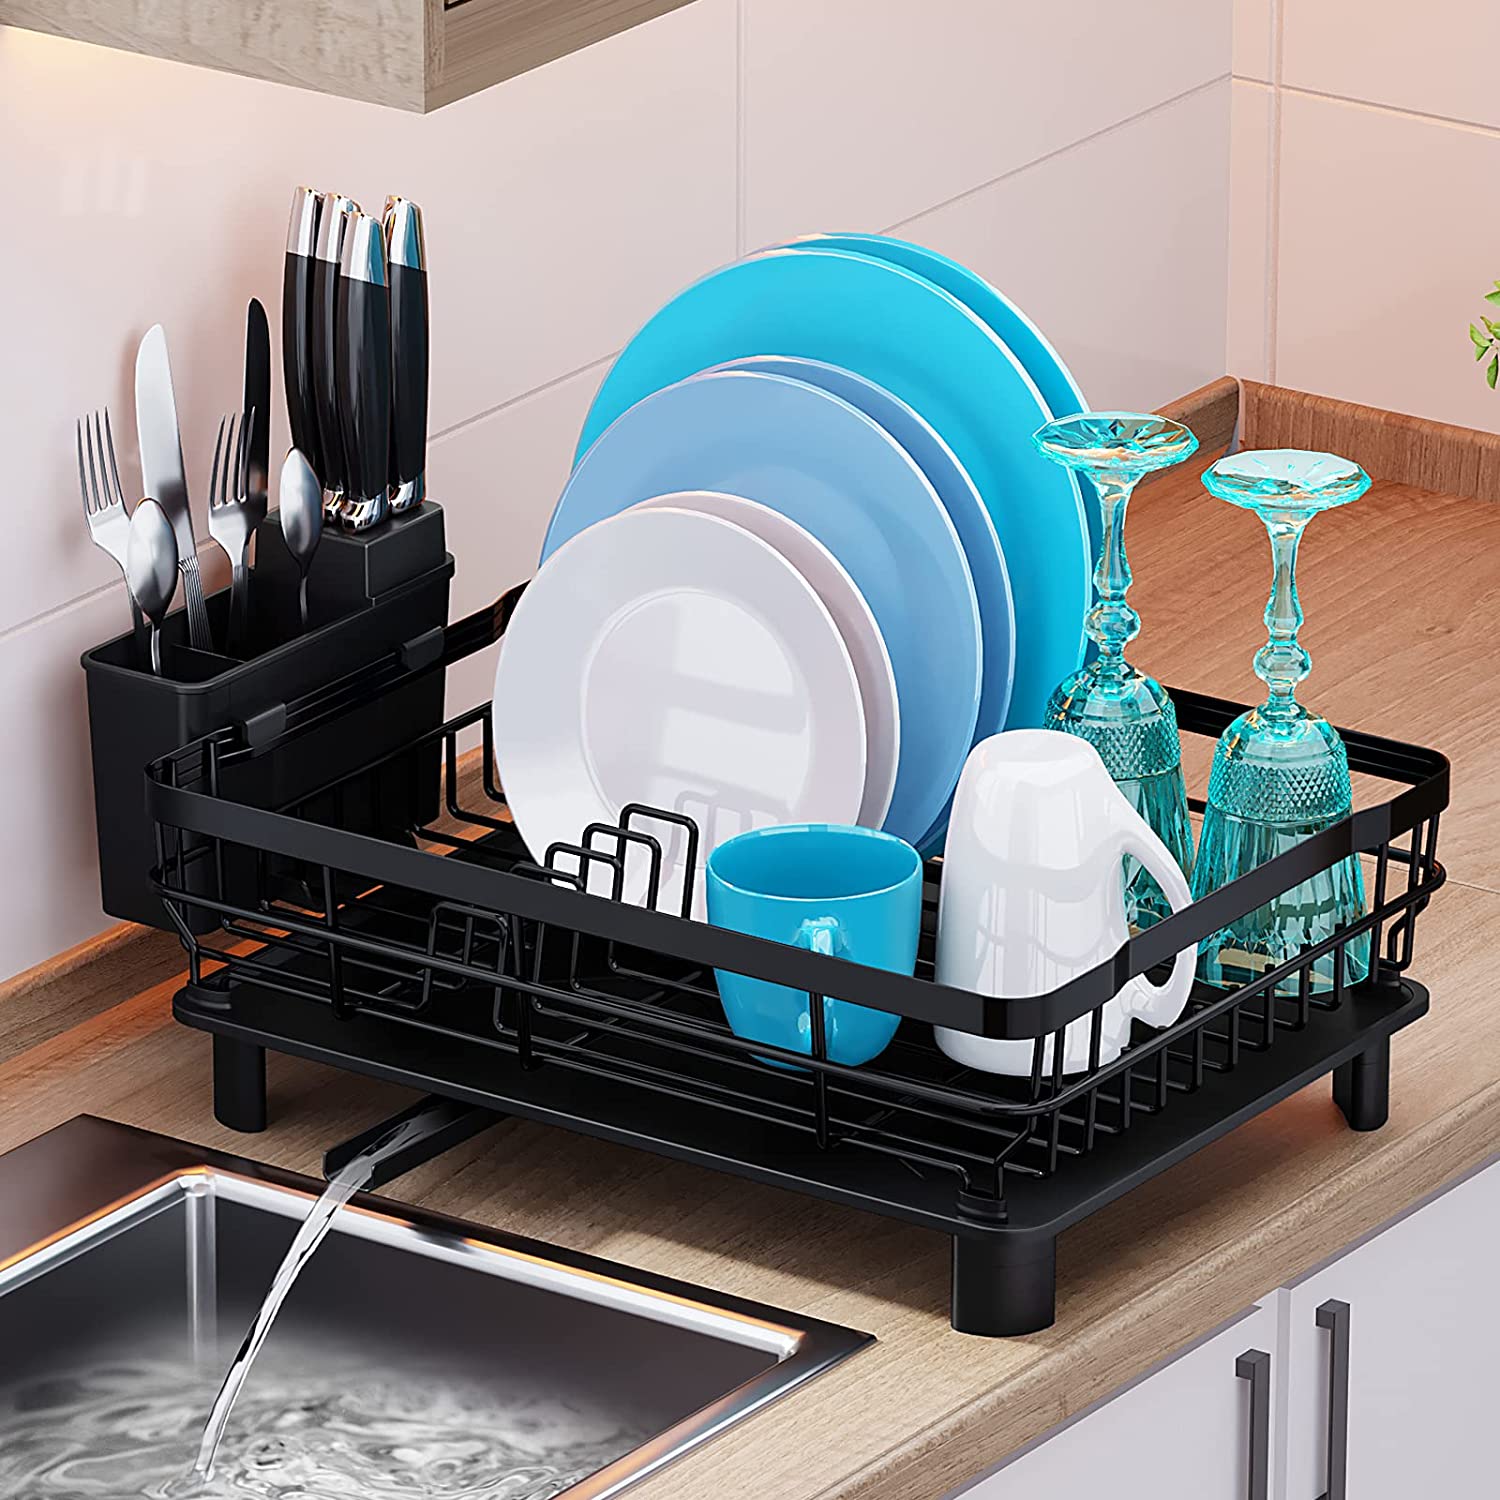 MOUKABAL 2-Tier Dish Racks for Kitchen Counter $18.99